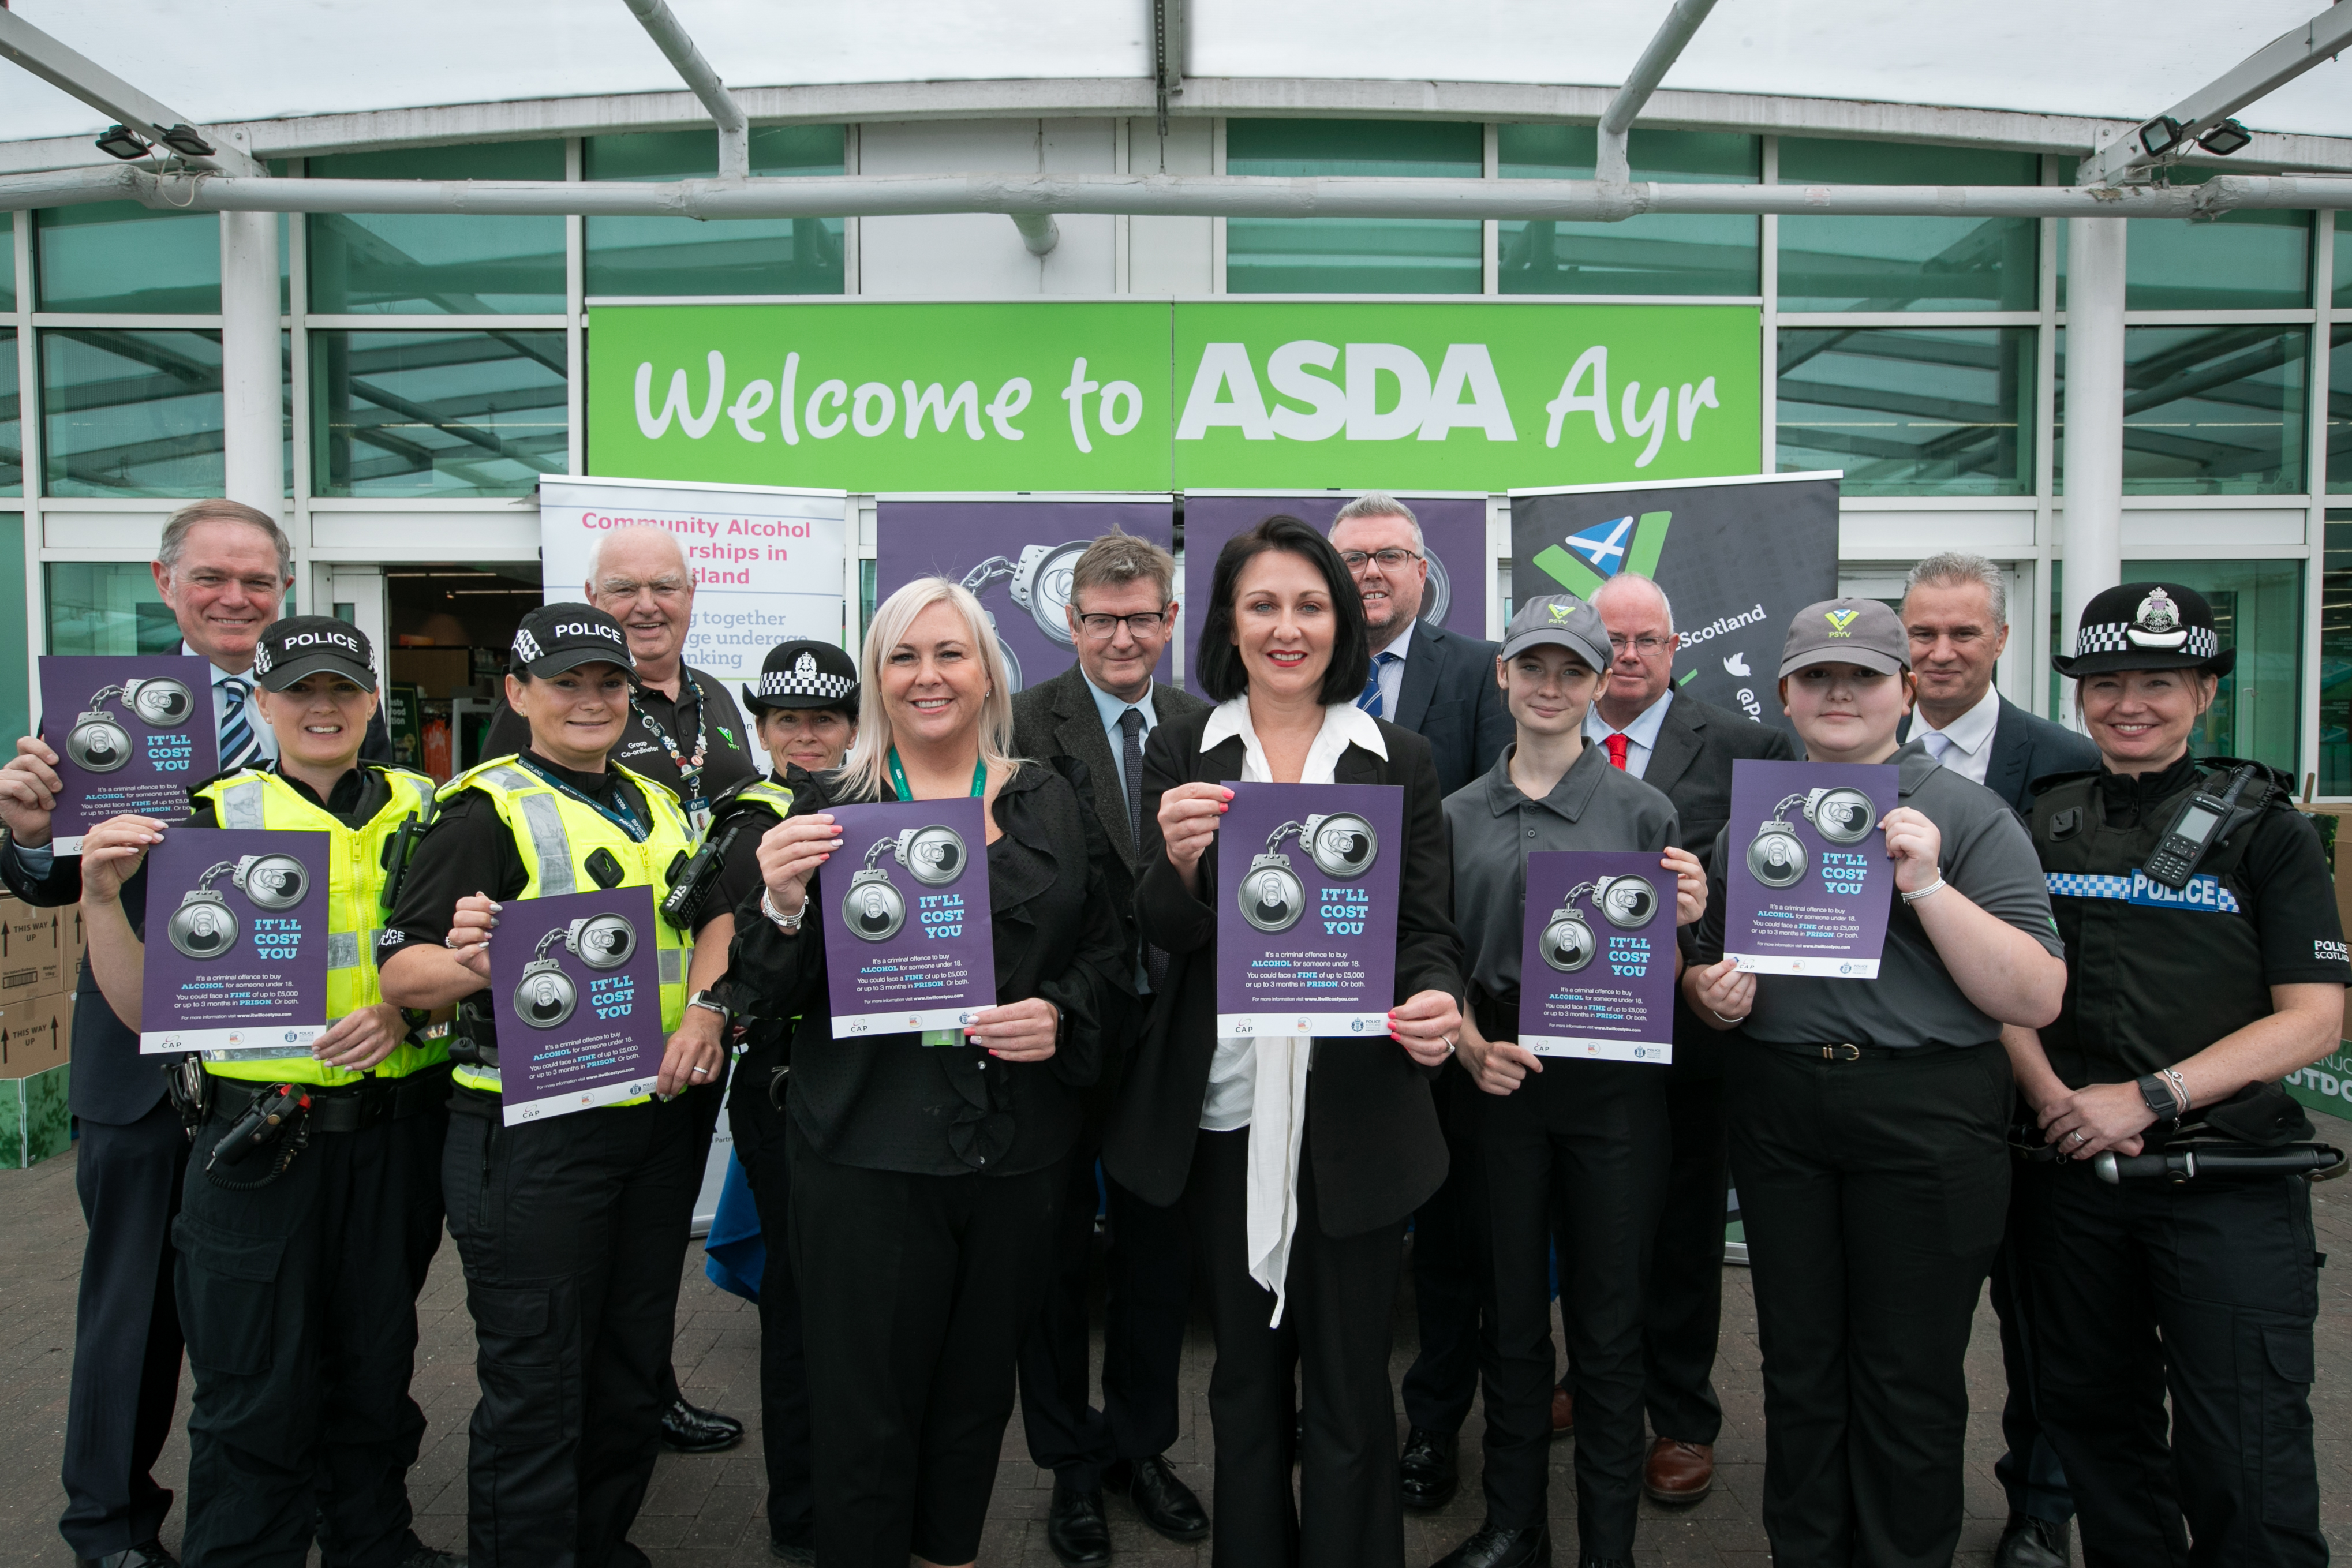 Community safety minister, police, Police Scotland Youth Volunteers, representatives from Scottish Alcohol Partnership Industry, Scottish Green Grocer Federation, Community Alcohol Partnership and The Scotch Whisky Association